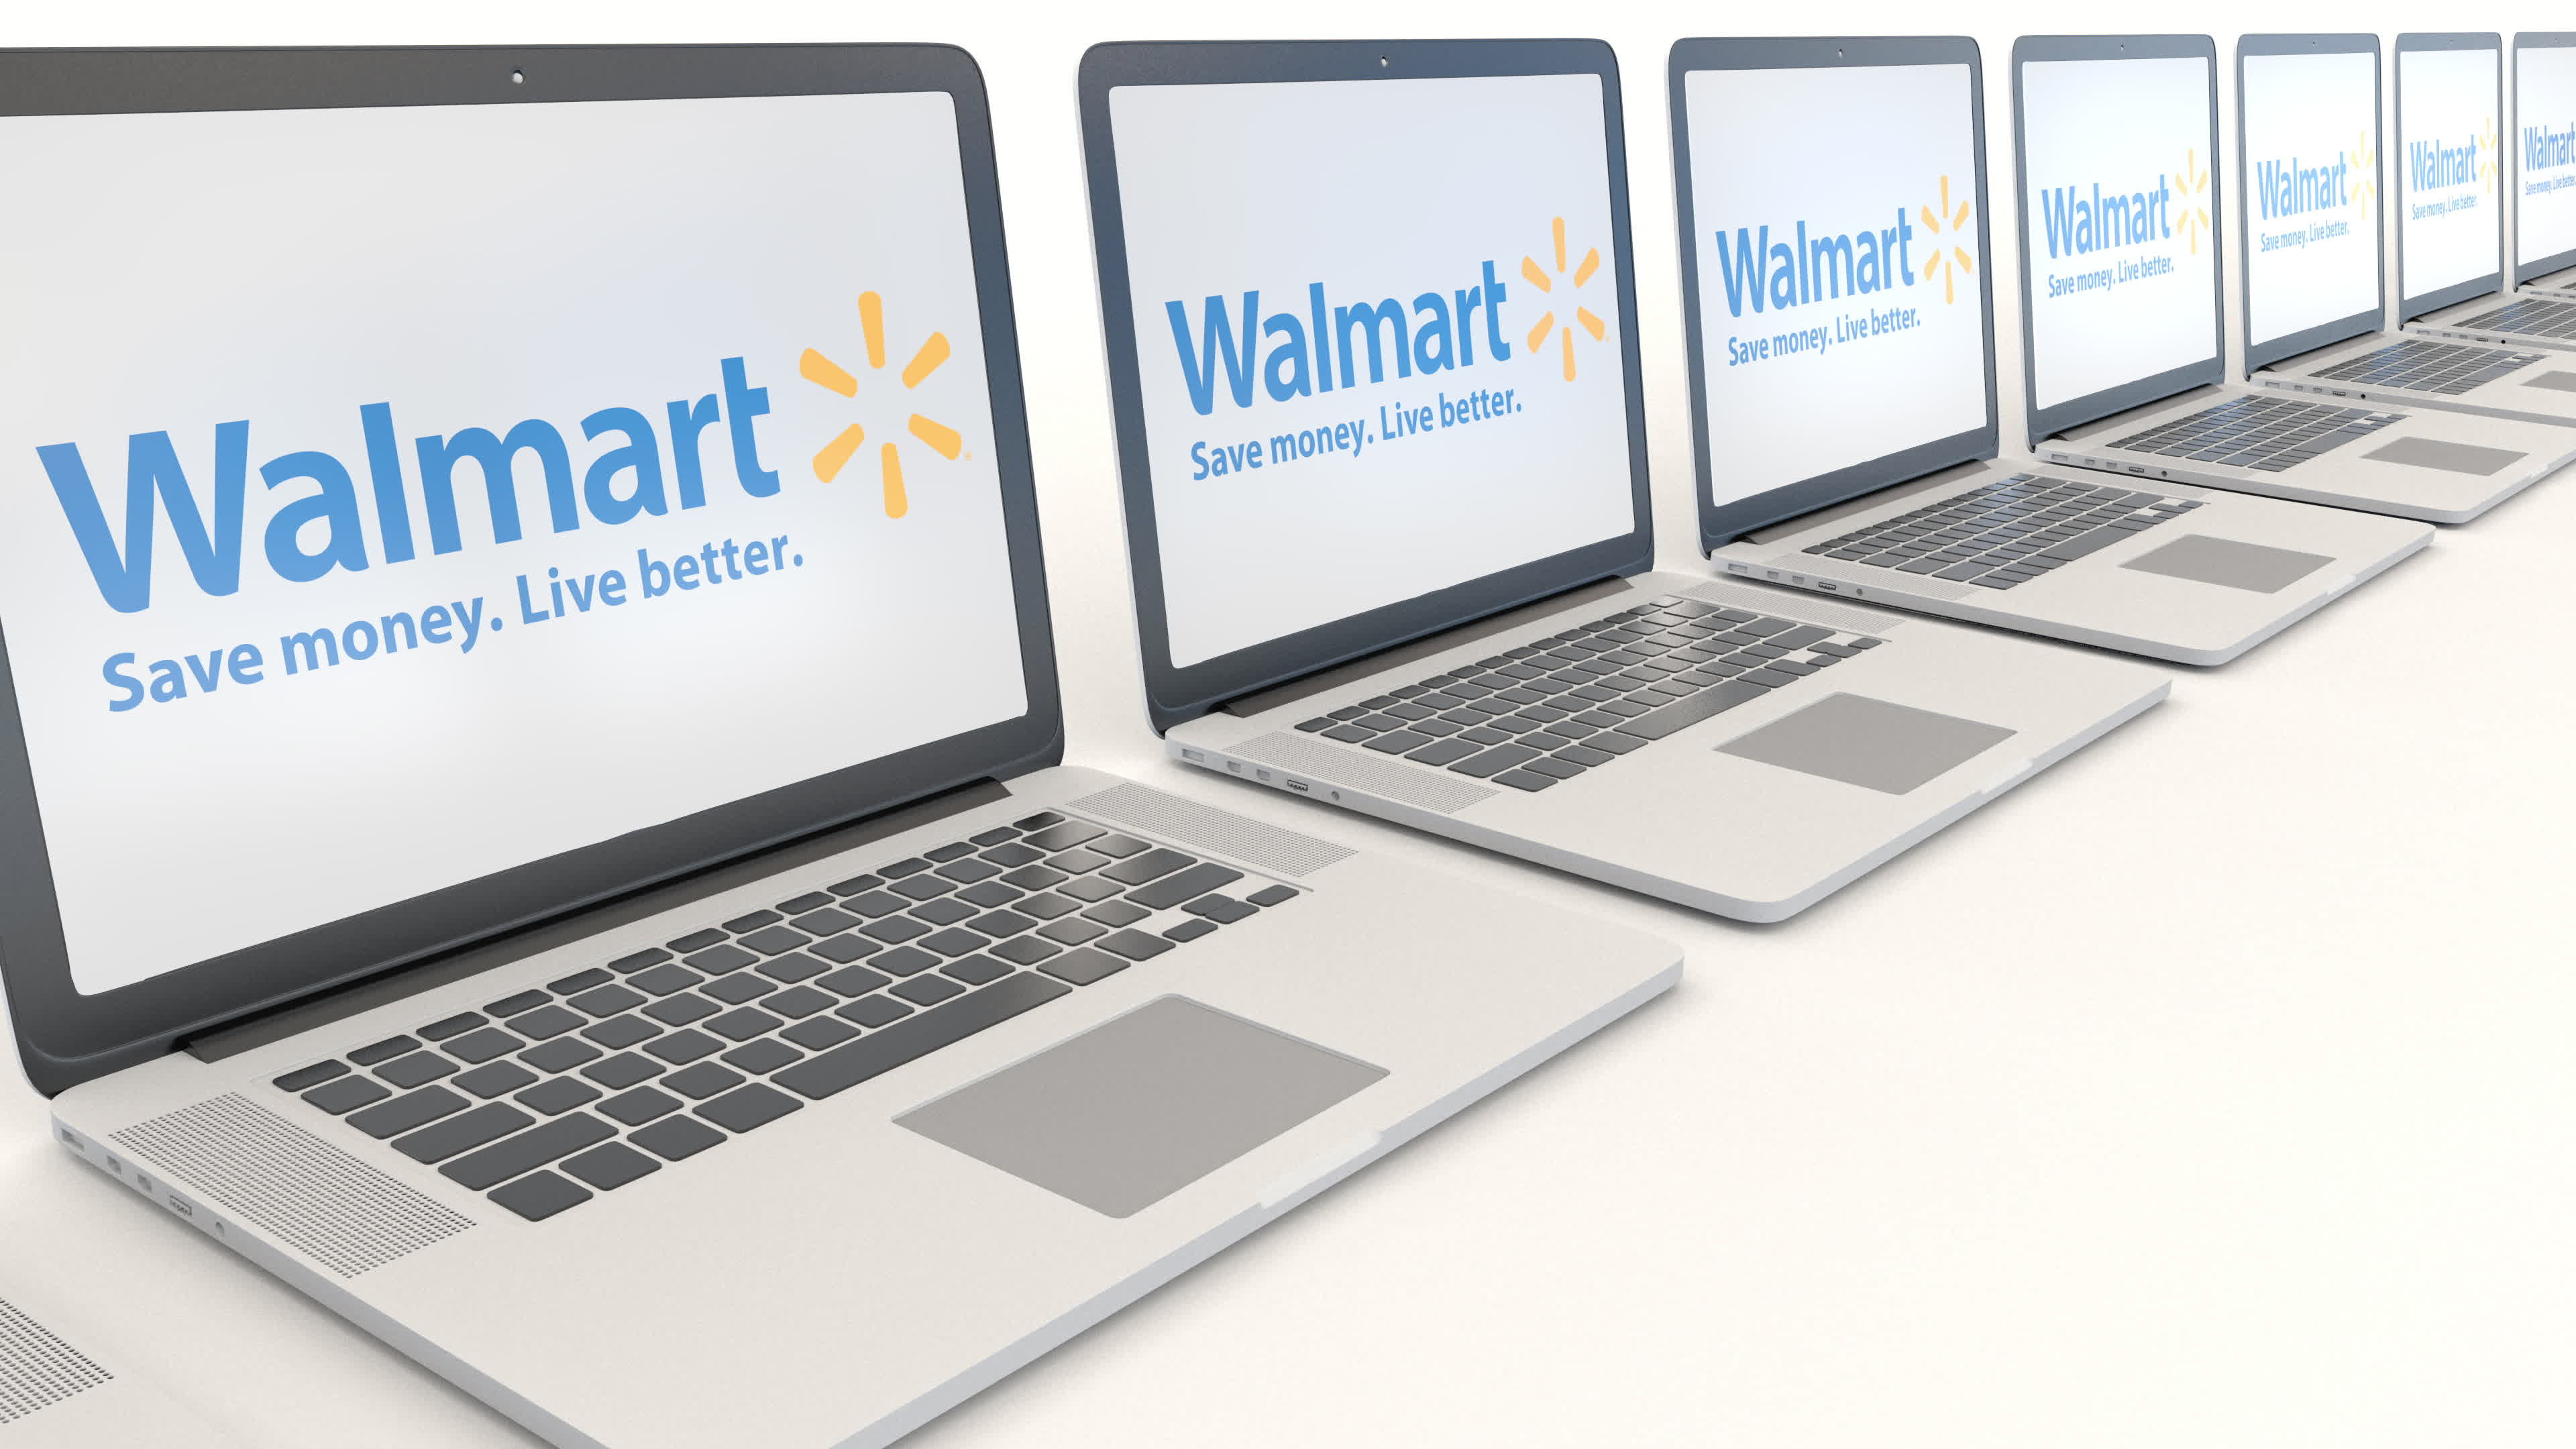 Walmart: The go-to supplier for a vast range of products, E-Commerce. 3840x2160 4K Wallpaper.